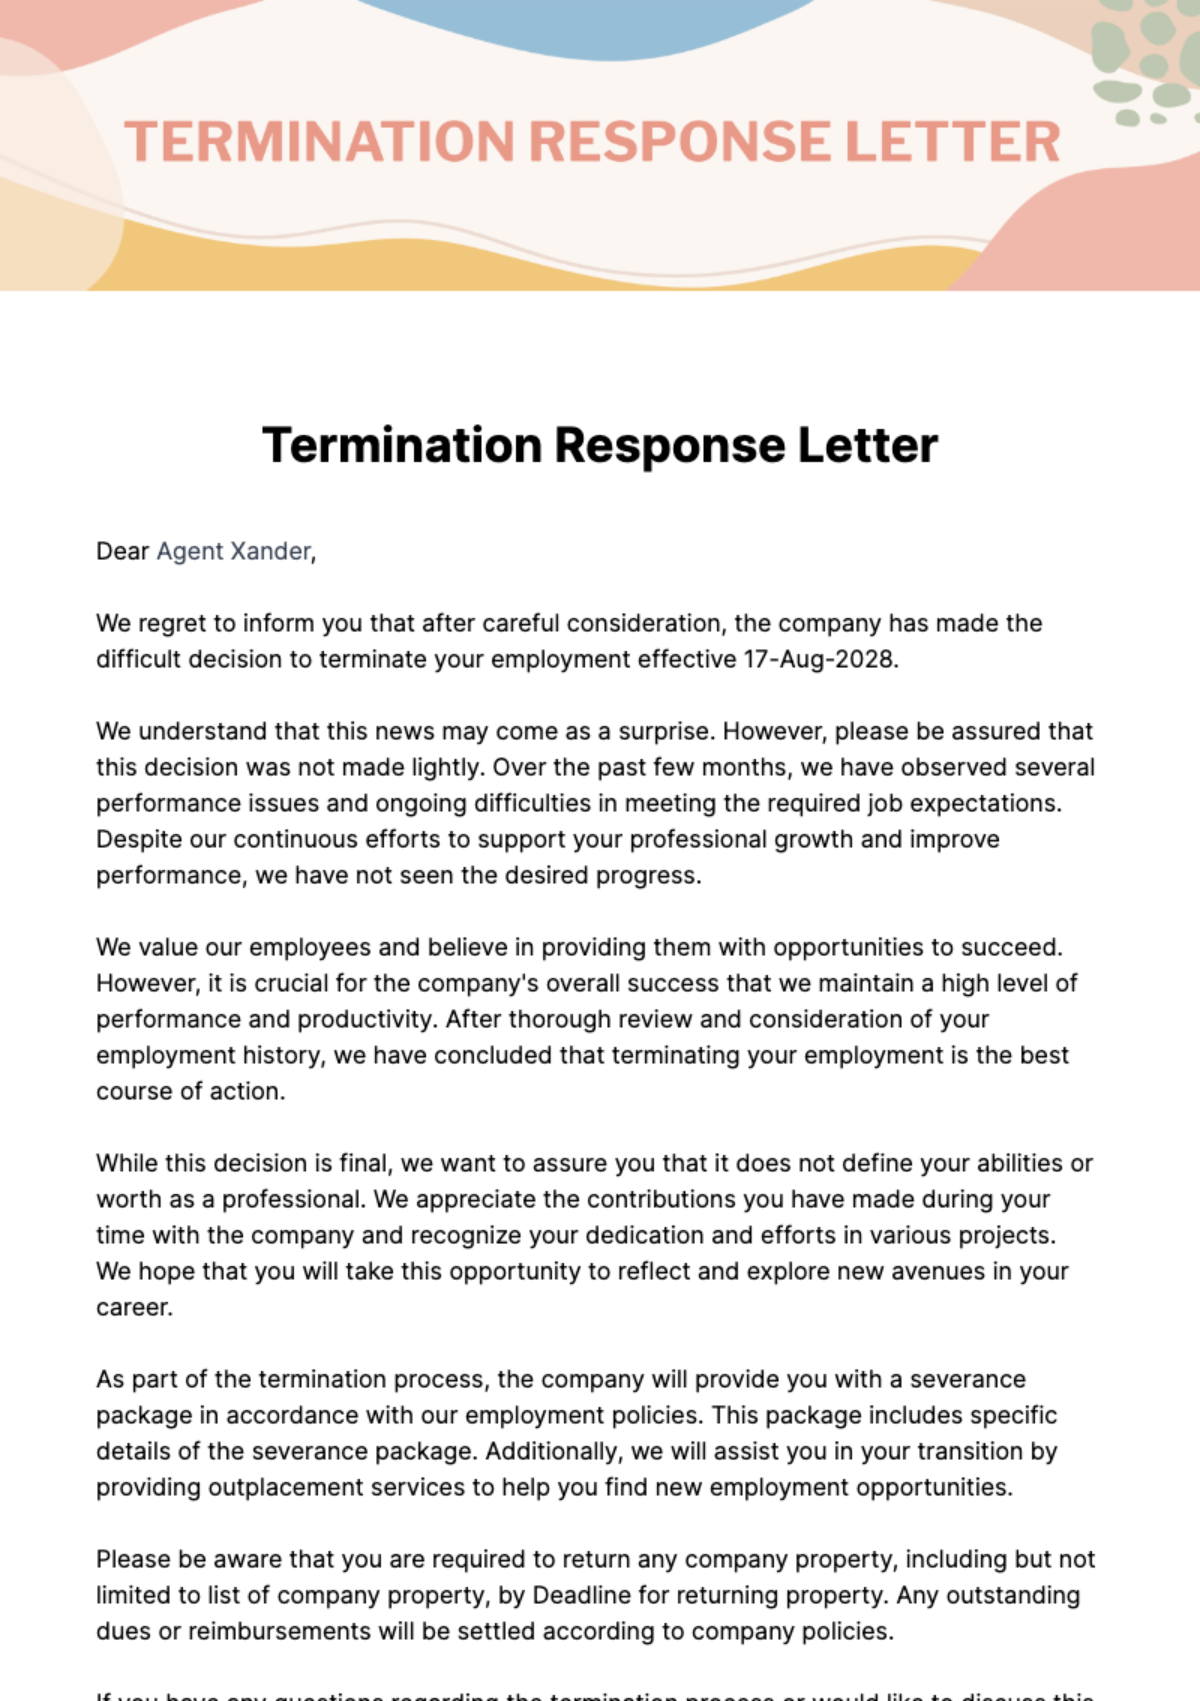 Free Termination Response Letter Template